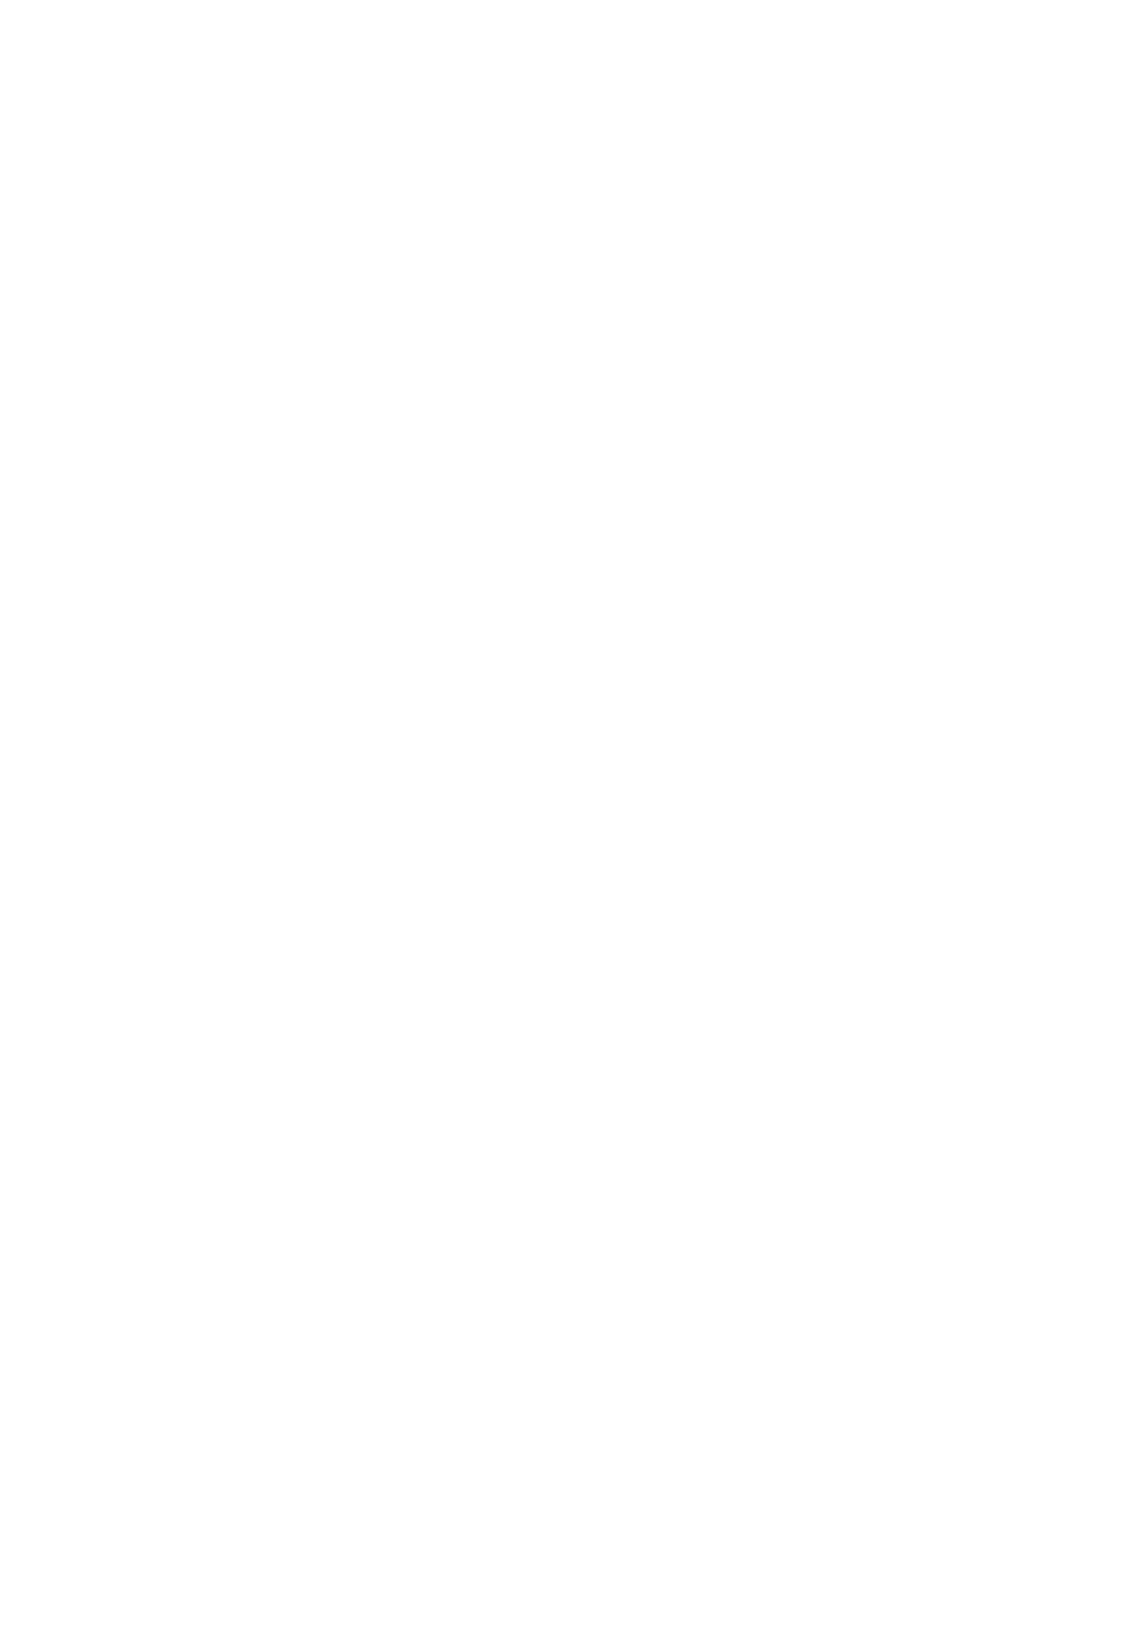 LEAF - Learning about Forests